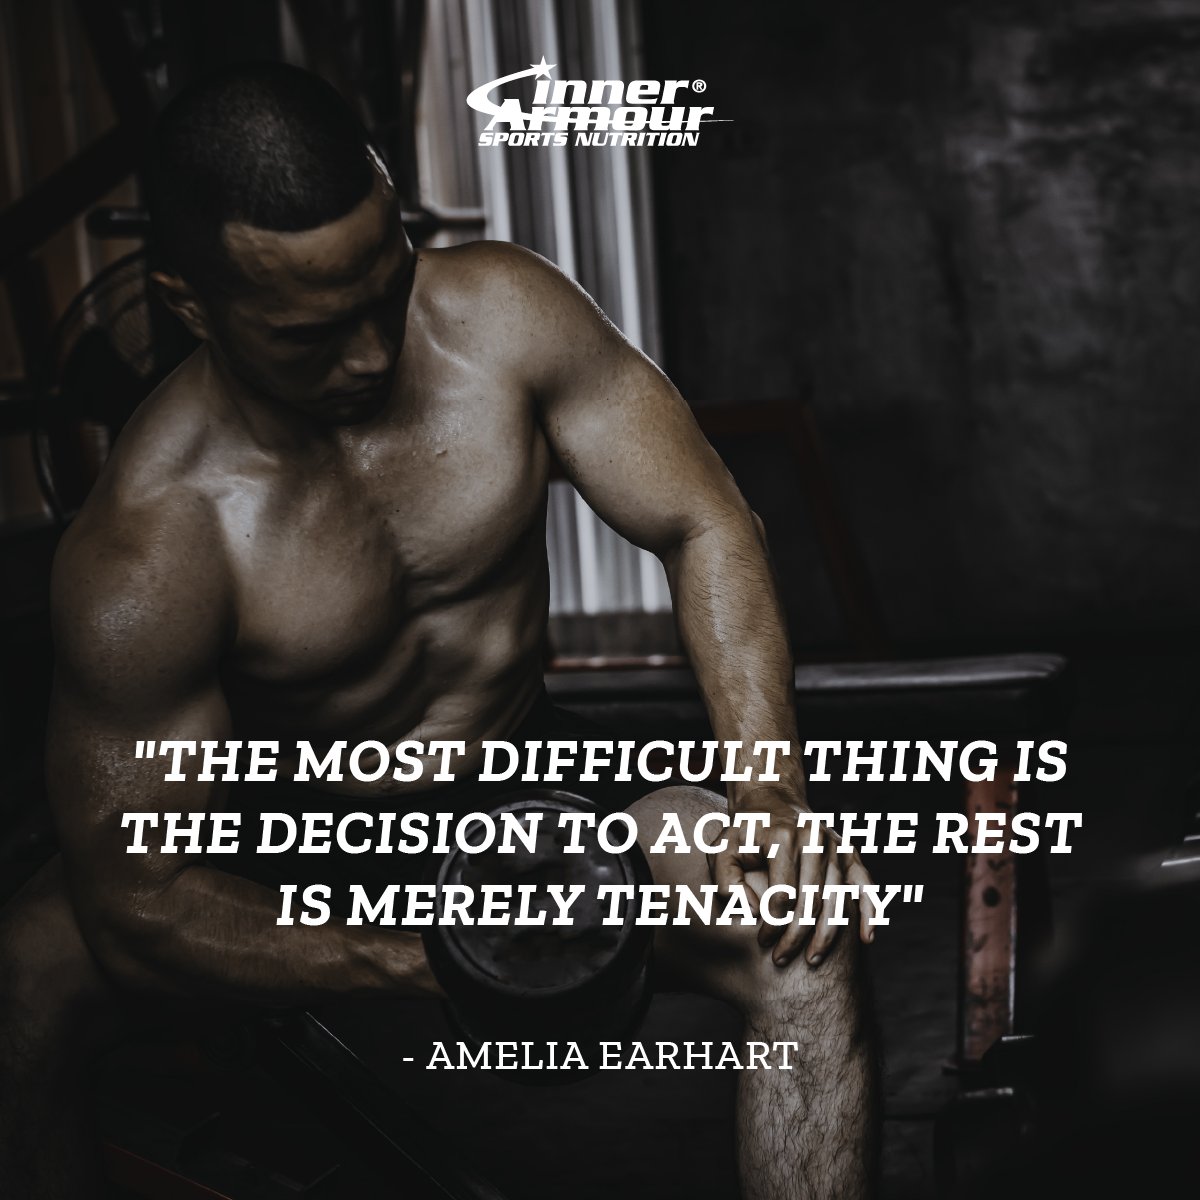 The most difficult thing is the decision to act, the rest is merely tenacity. - Amelia Earhart #StrengthFromWithin #indisputableresults #sportsnutrition#innerarmour